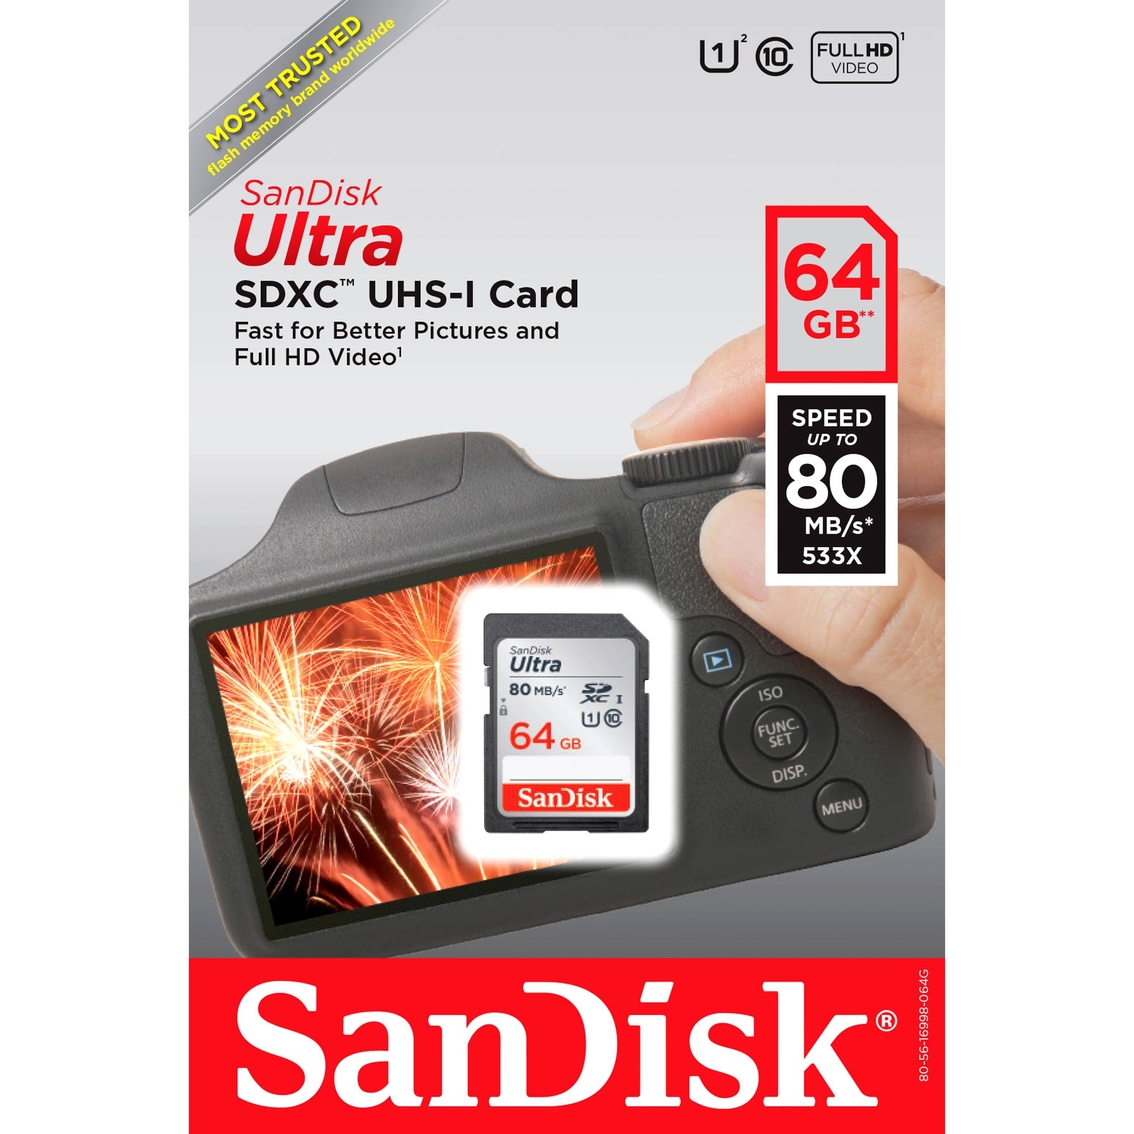 SanDisk 64GB SDHC Class 10 Memory - Image 2 of 2